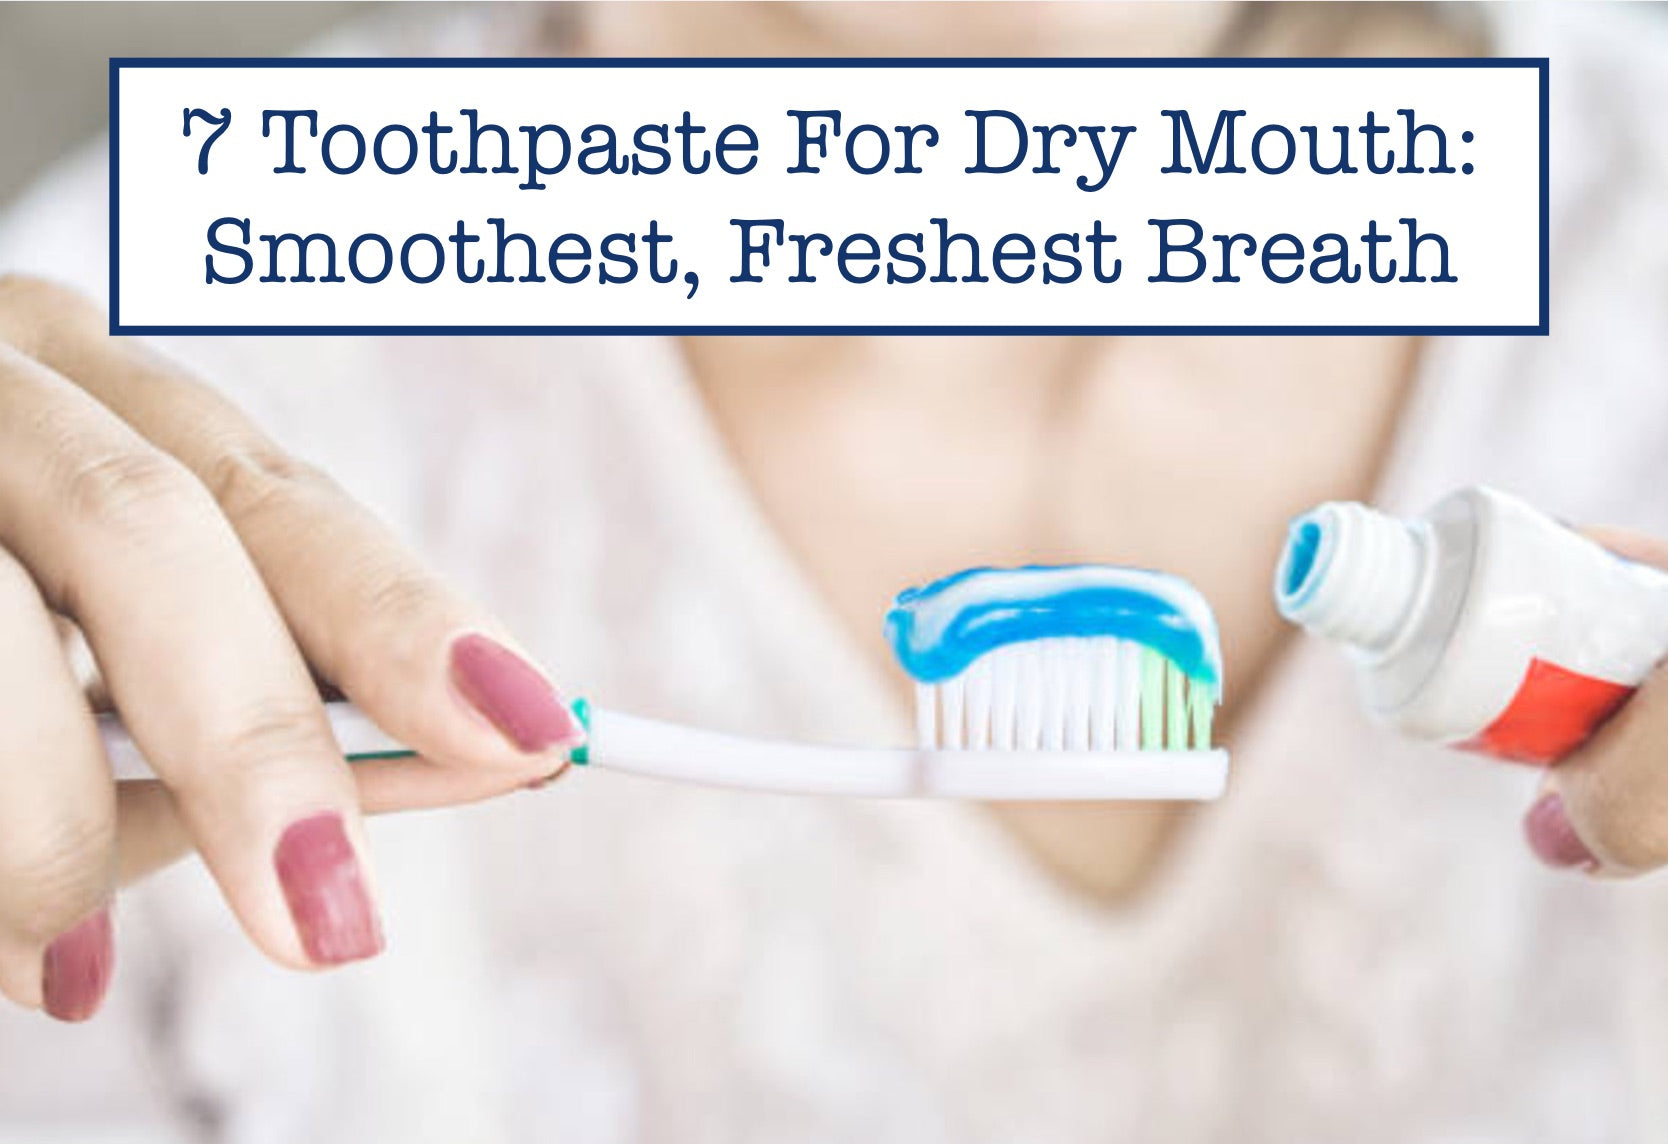 7 Toothpaste For Dry Mouth: Smoothest, Freshest Breath